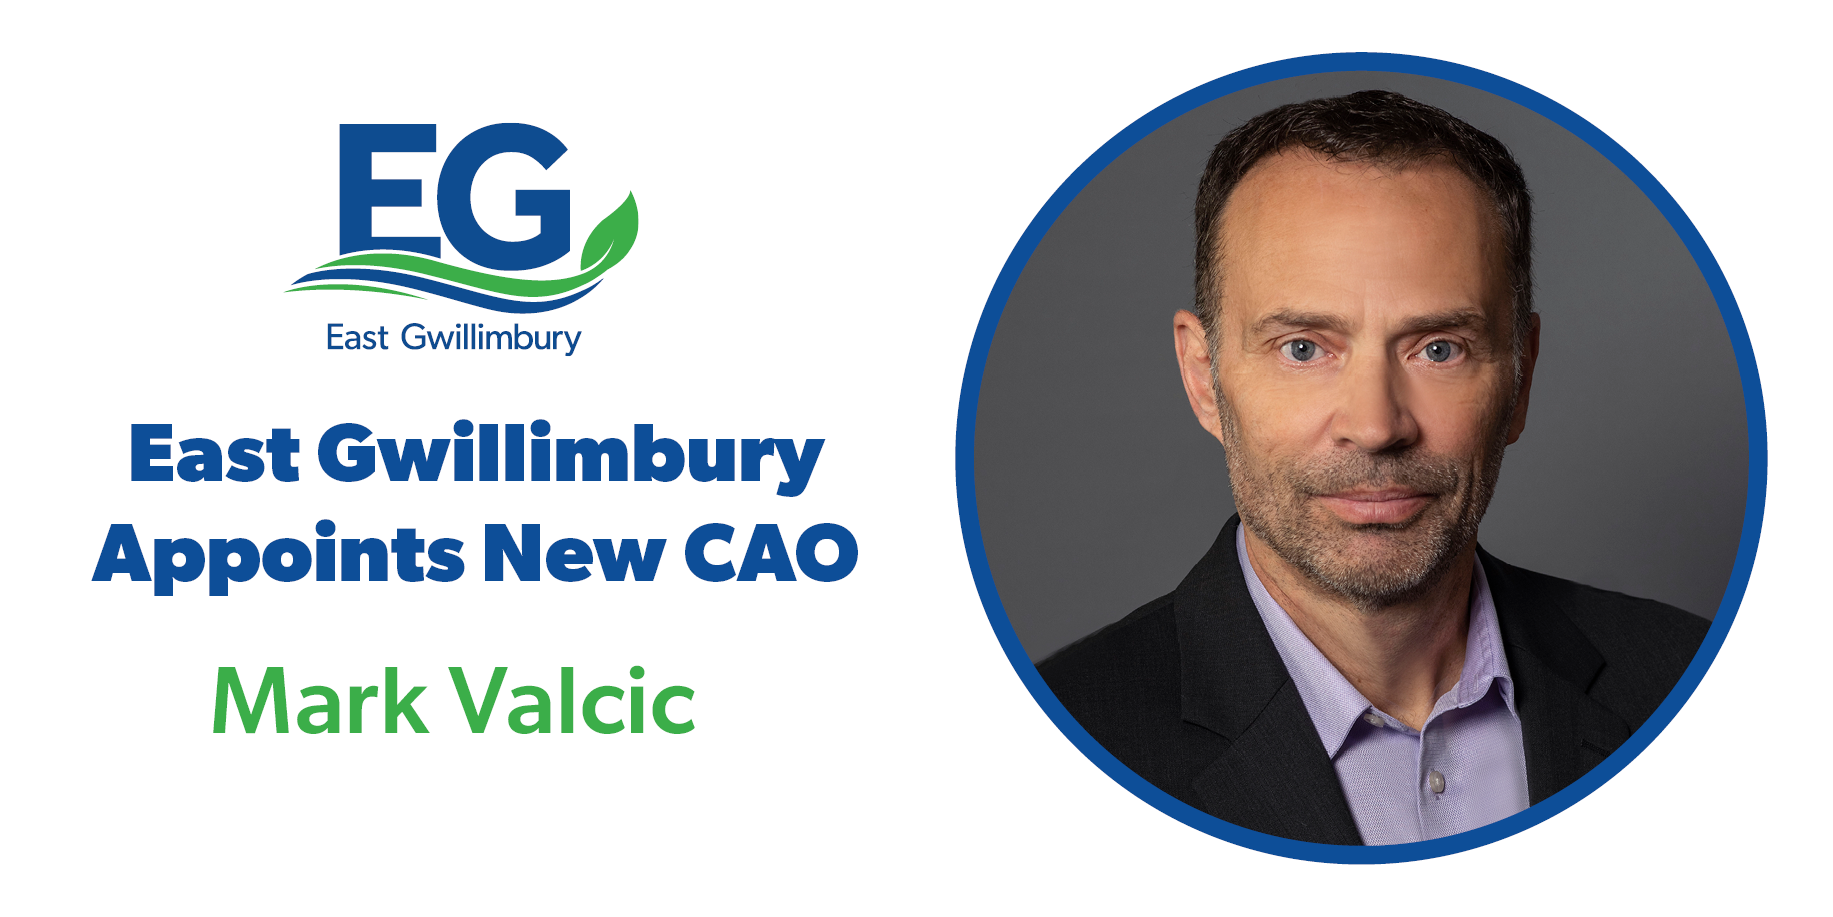 EG appoints new Chief Administrative Officer, Mark Valcic 